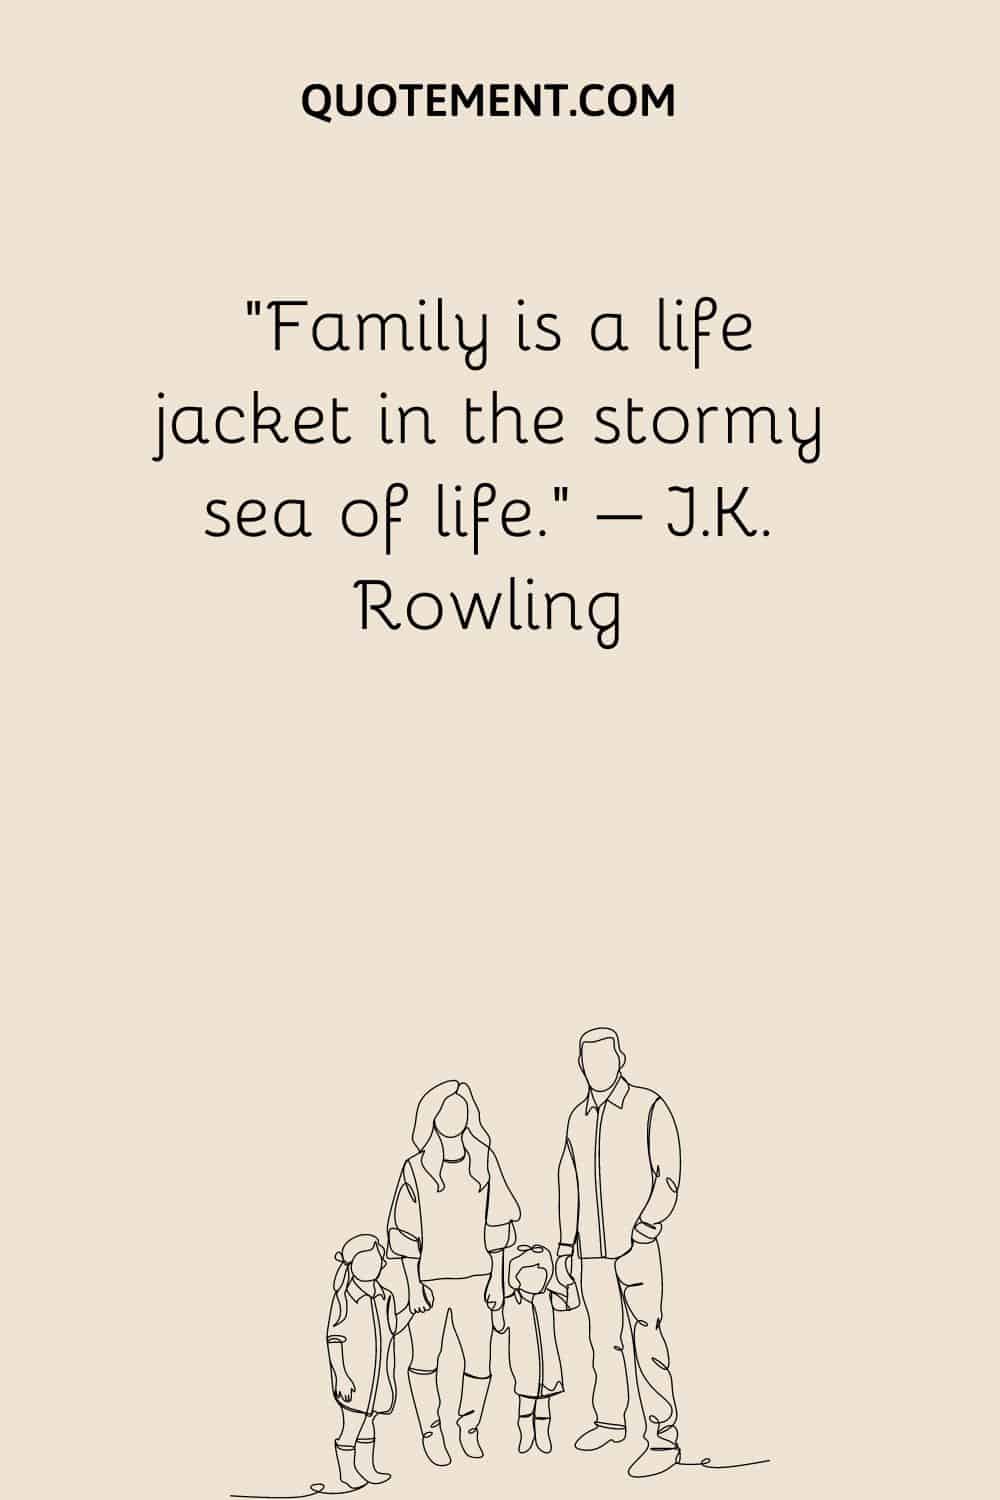 Family is a life jacket in the stormy sea of life